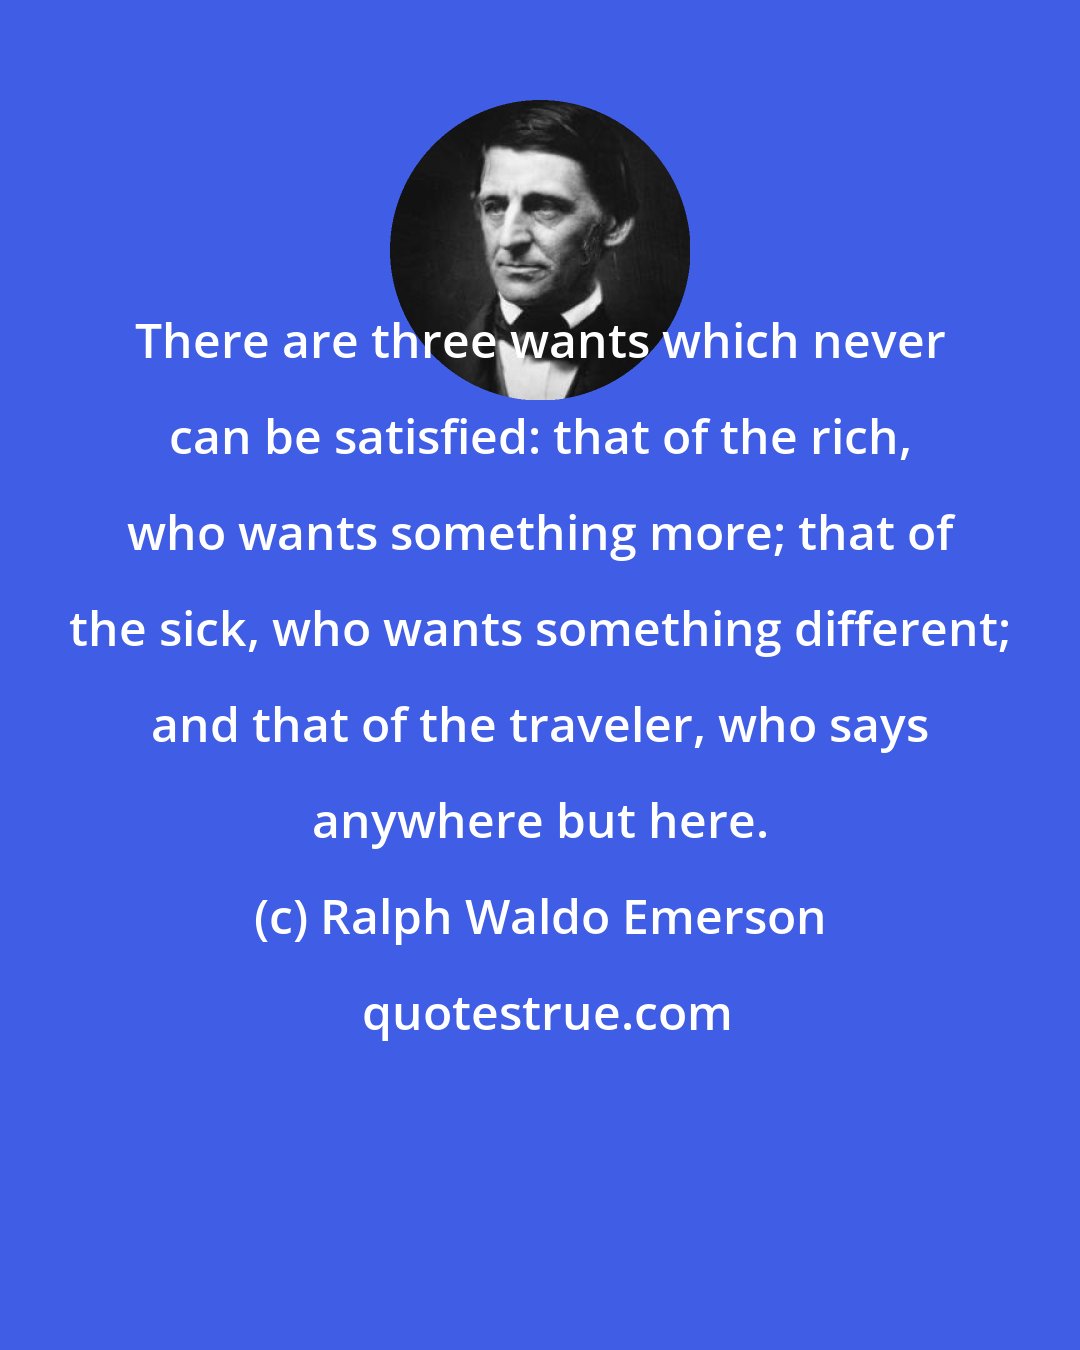 Ralph Waldo Emerson: There are three wants which never can be satisfied: that of the rich, who wants something more; that of the sick, who wants something different; and that of the traveler, who says anywhere but here.